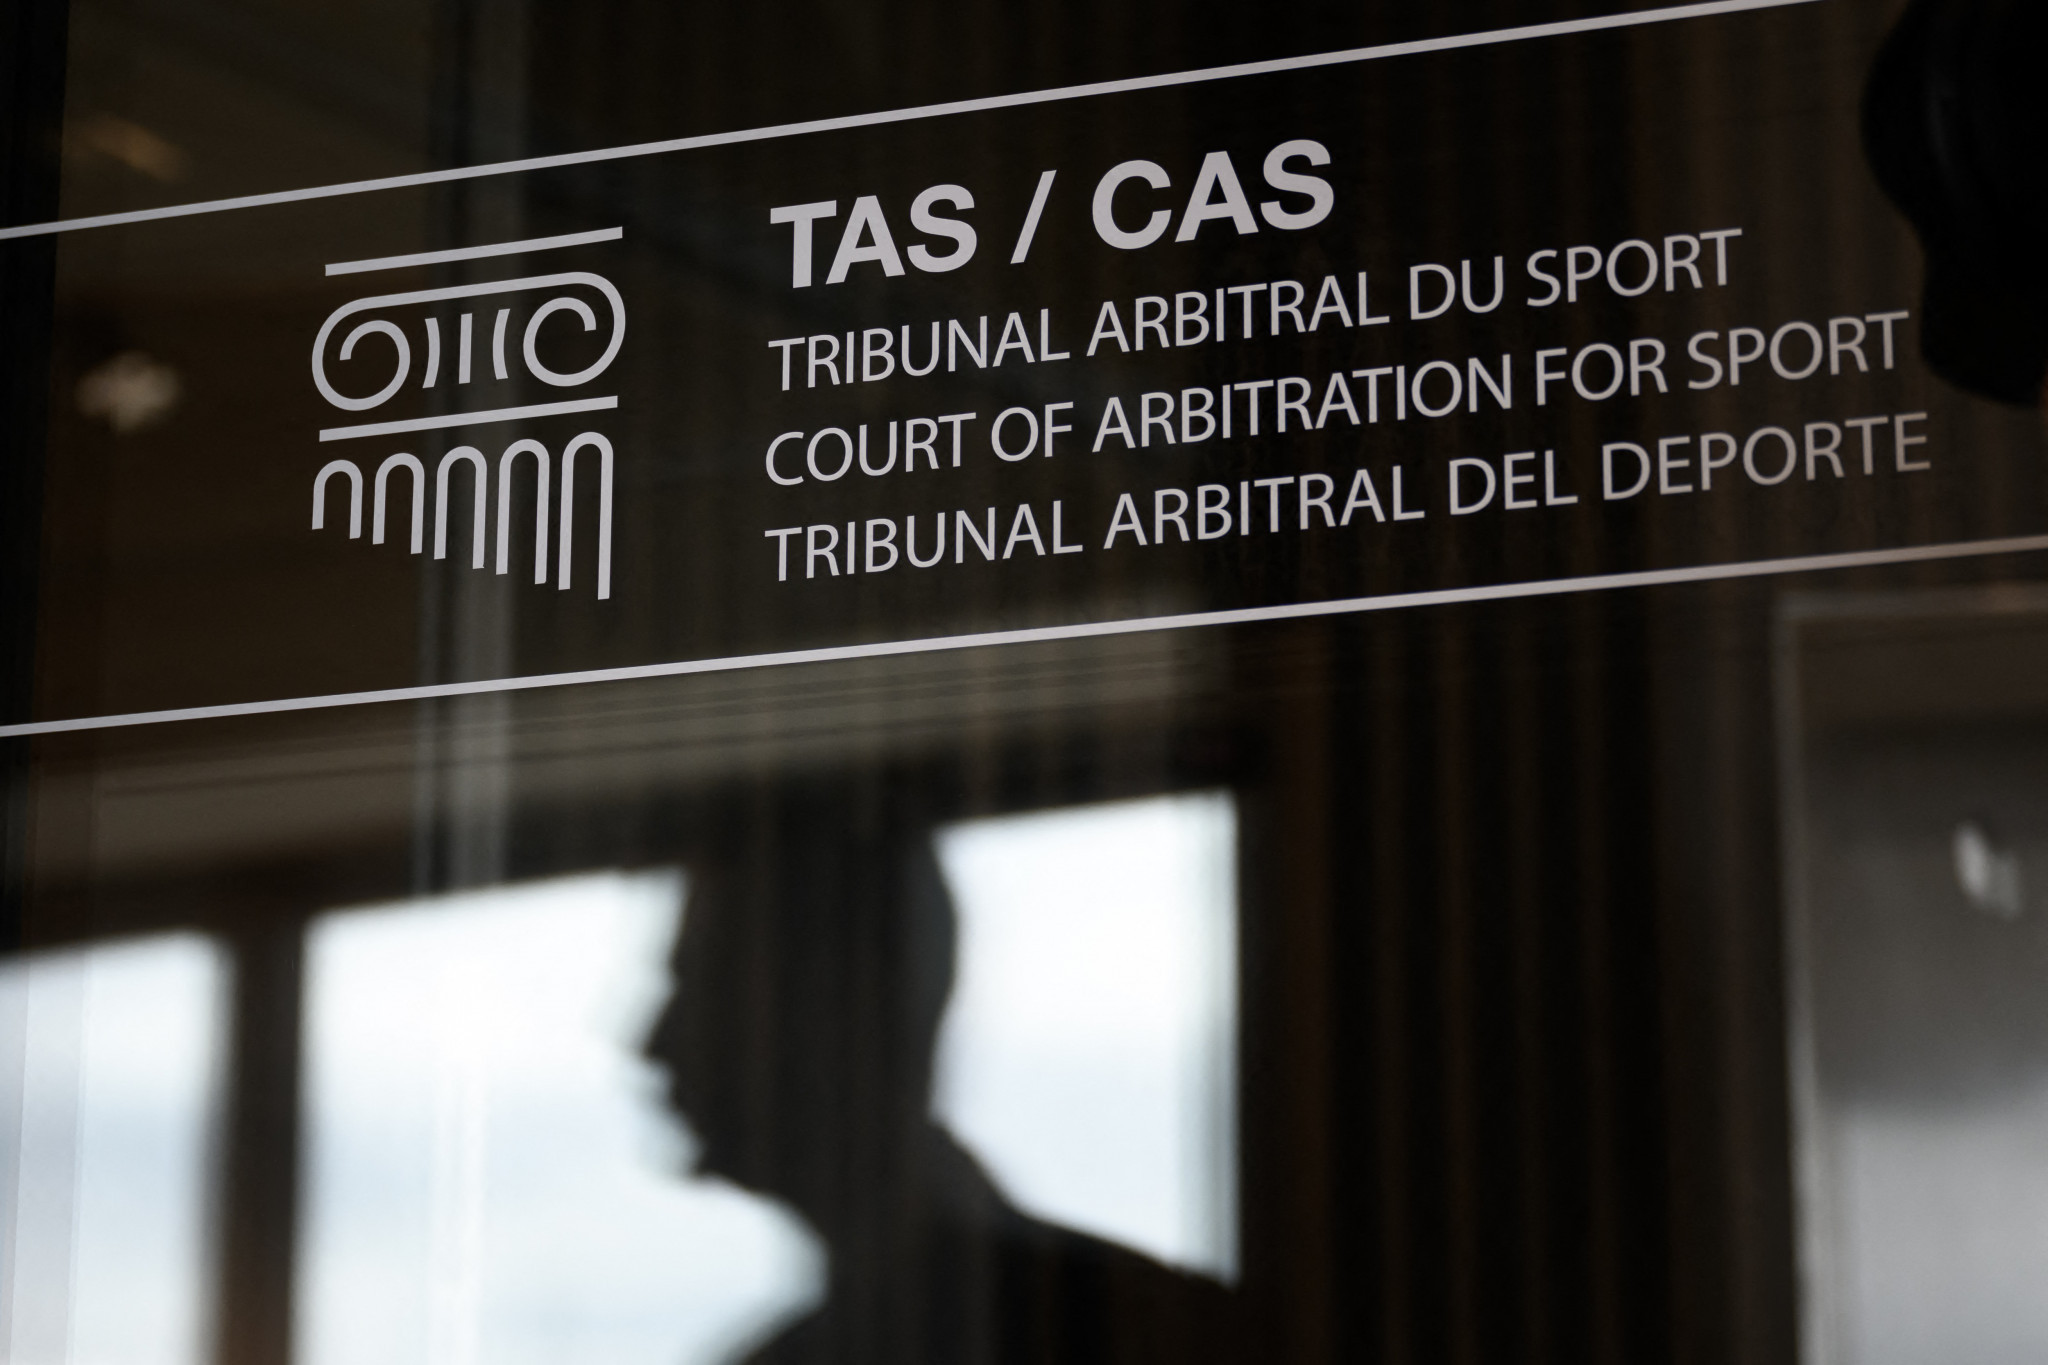 In March, the Court of Arbitration for Sport rejected the life ban imposed by FIFA ruling that the testimony was 